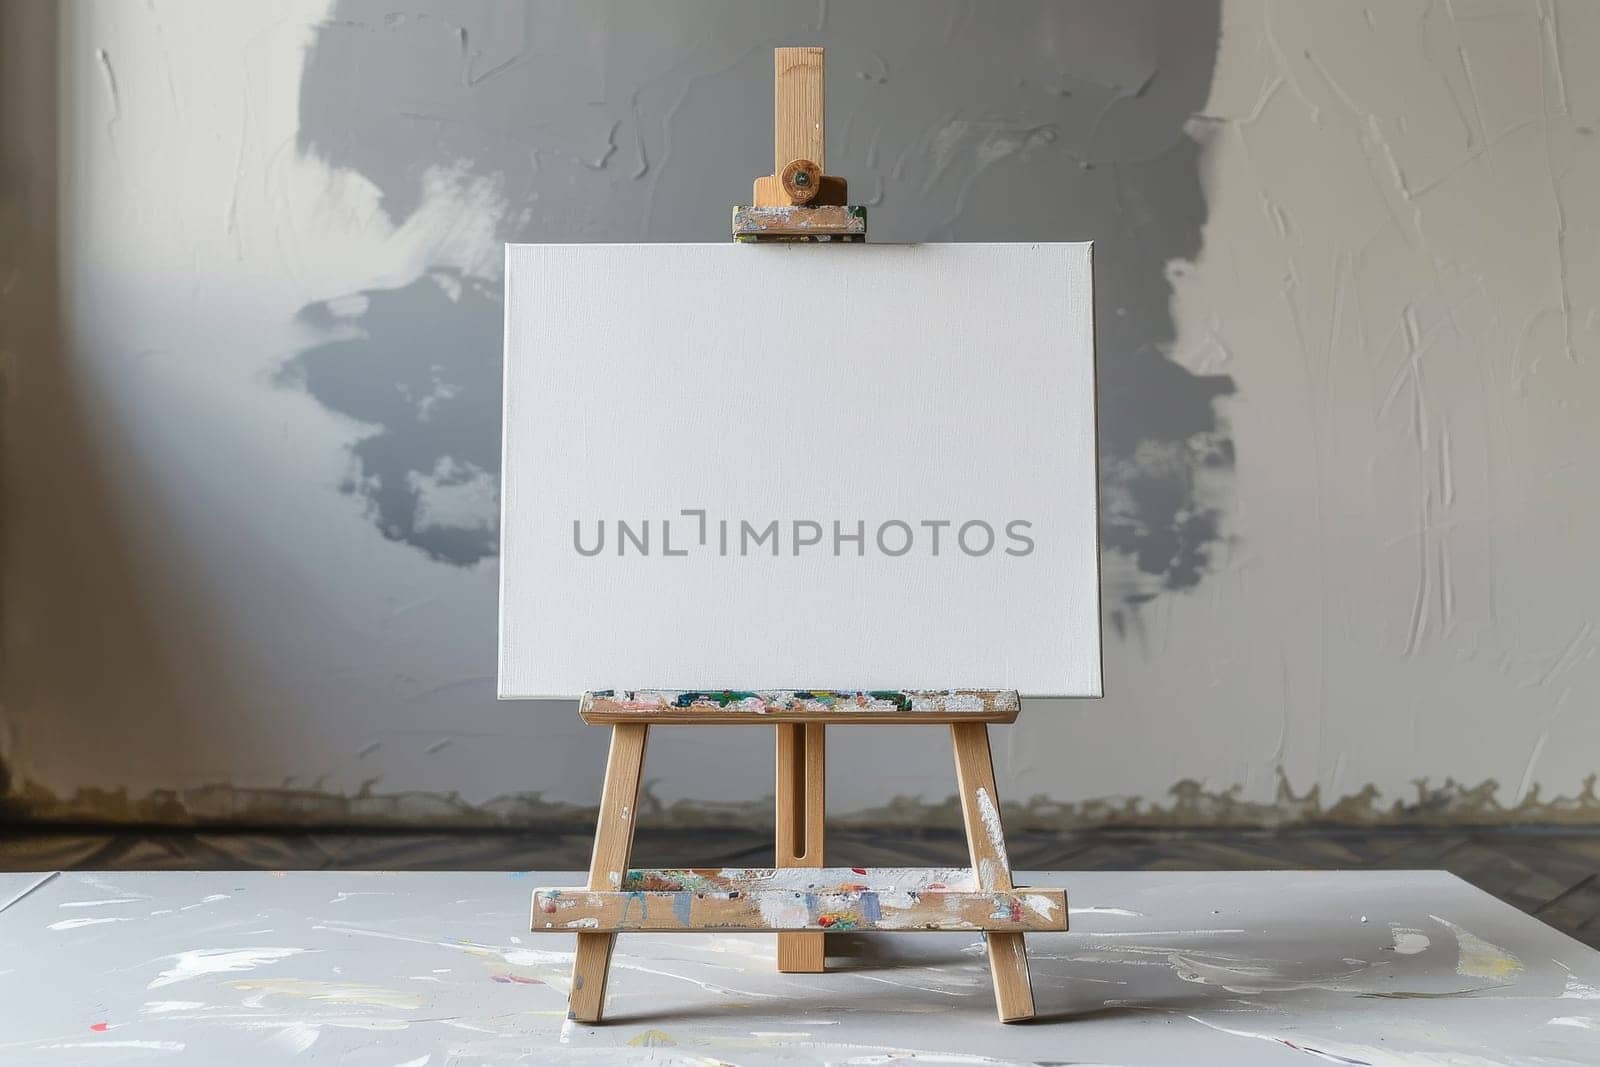 A white canvas is propped up on a wooden easel. The canvas is empty, waiting to be filled with color and creativity. The easel itself is a simple wooden structure